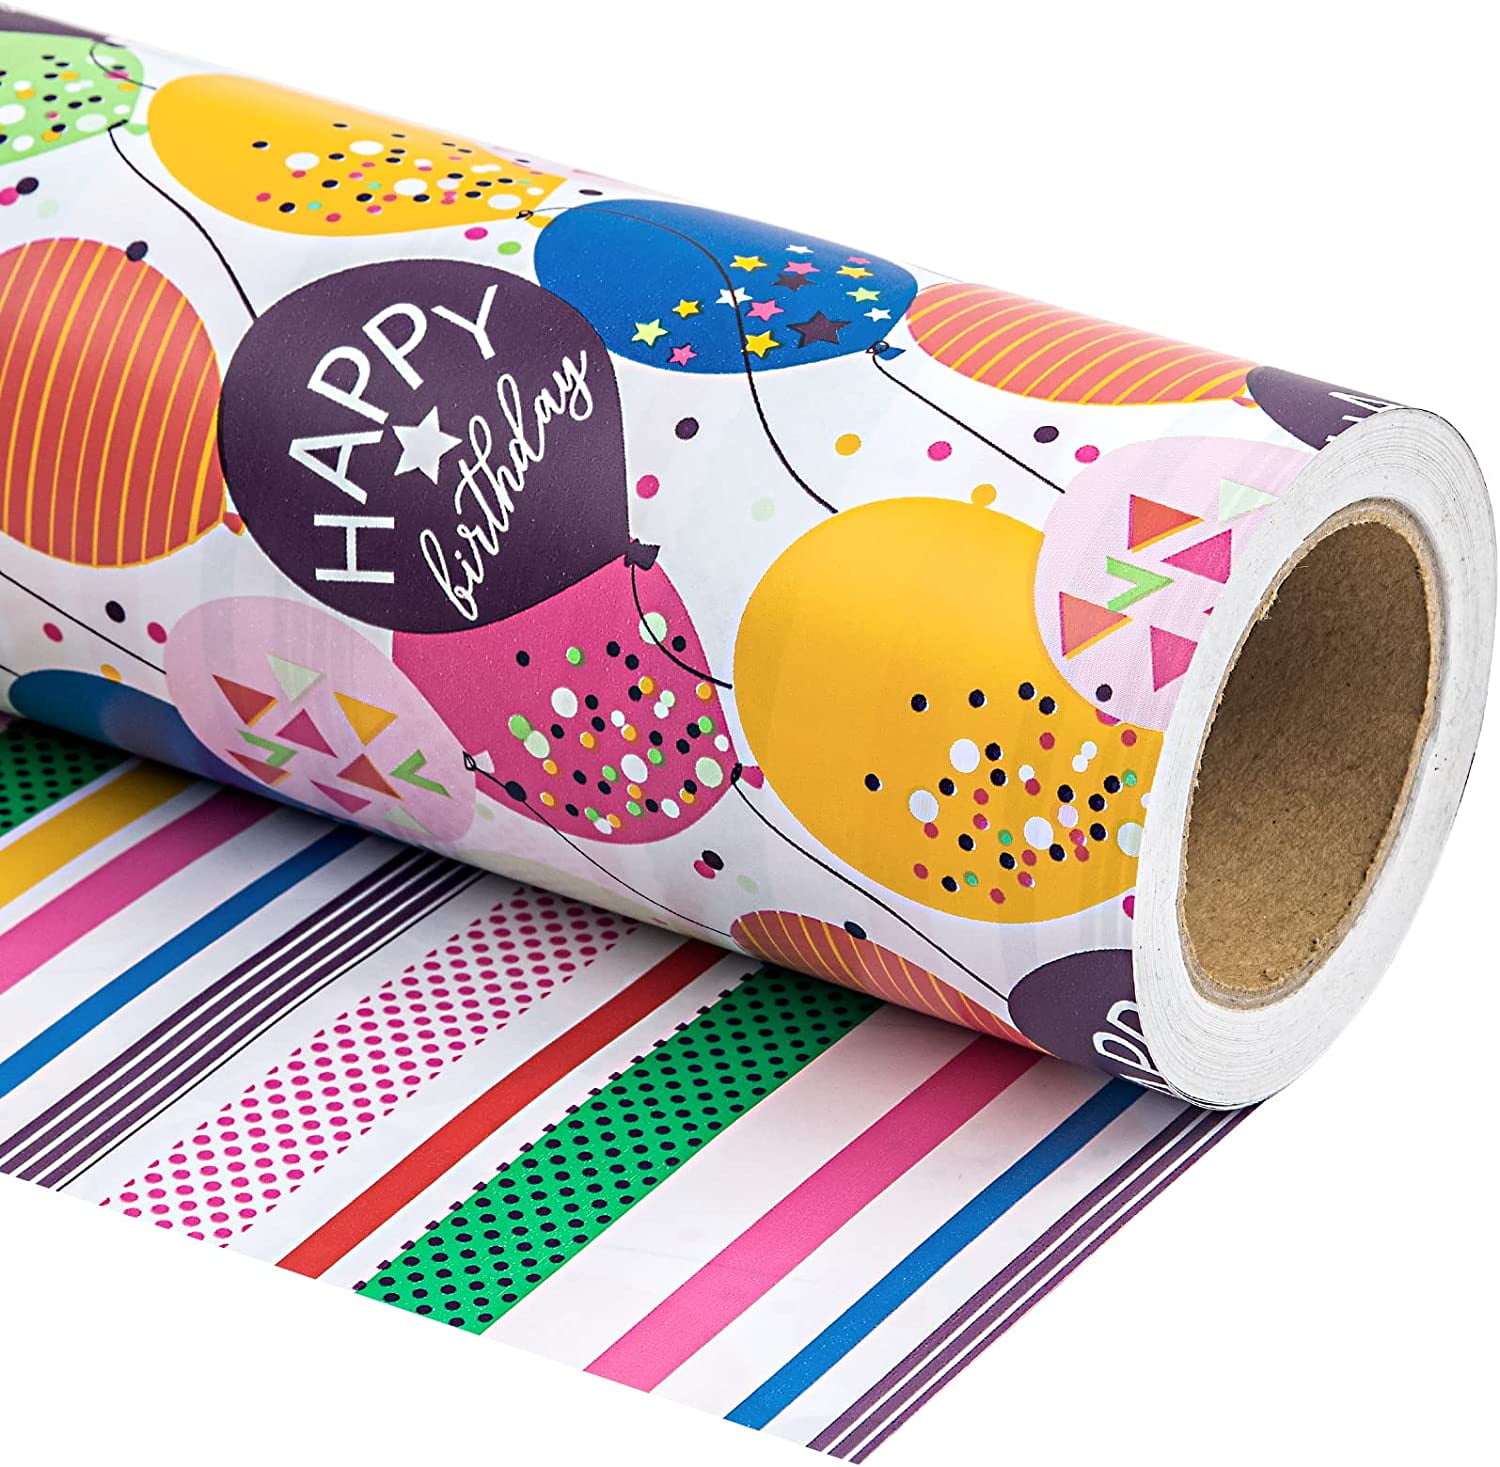 Hallmark All Occasion Reversible Wrapping Paper Bundle - Happy Birthday (3  Rolls - 75 sq. ft. ttl) Cupcakes, Stripes, Flowers, Polka Dots 